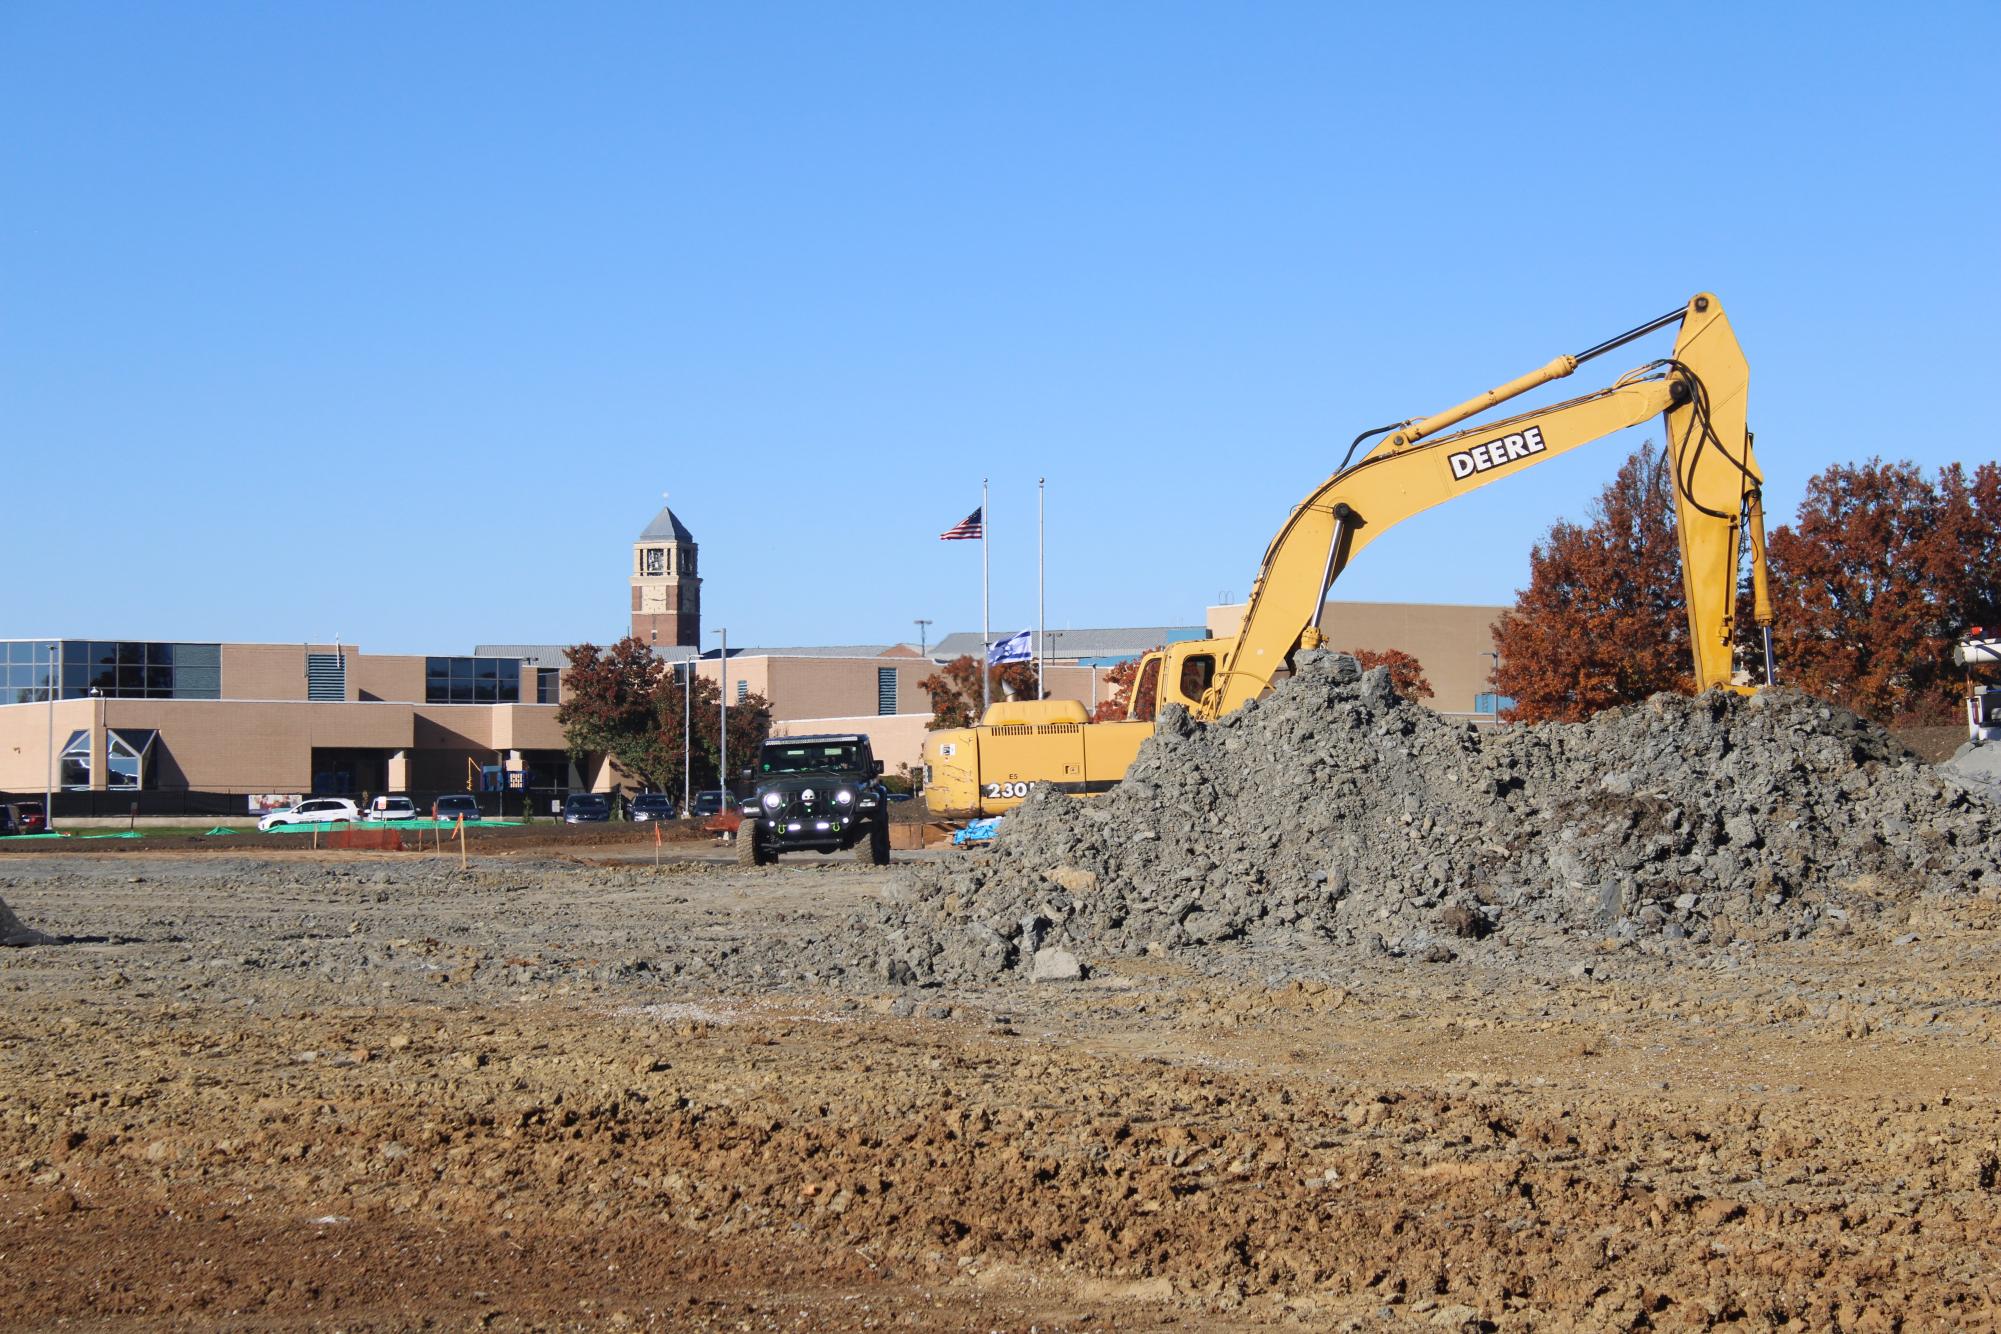 Excavator with HBHA in the back. Image by Skyler Penner 
